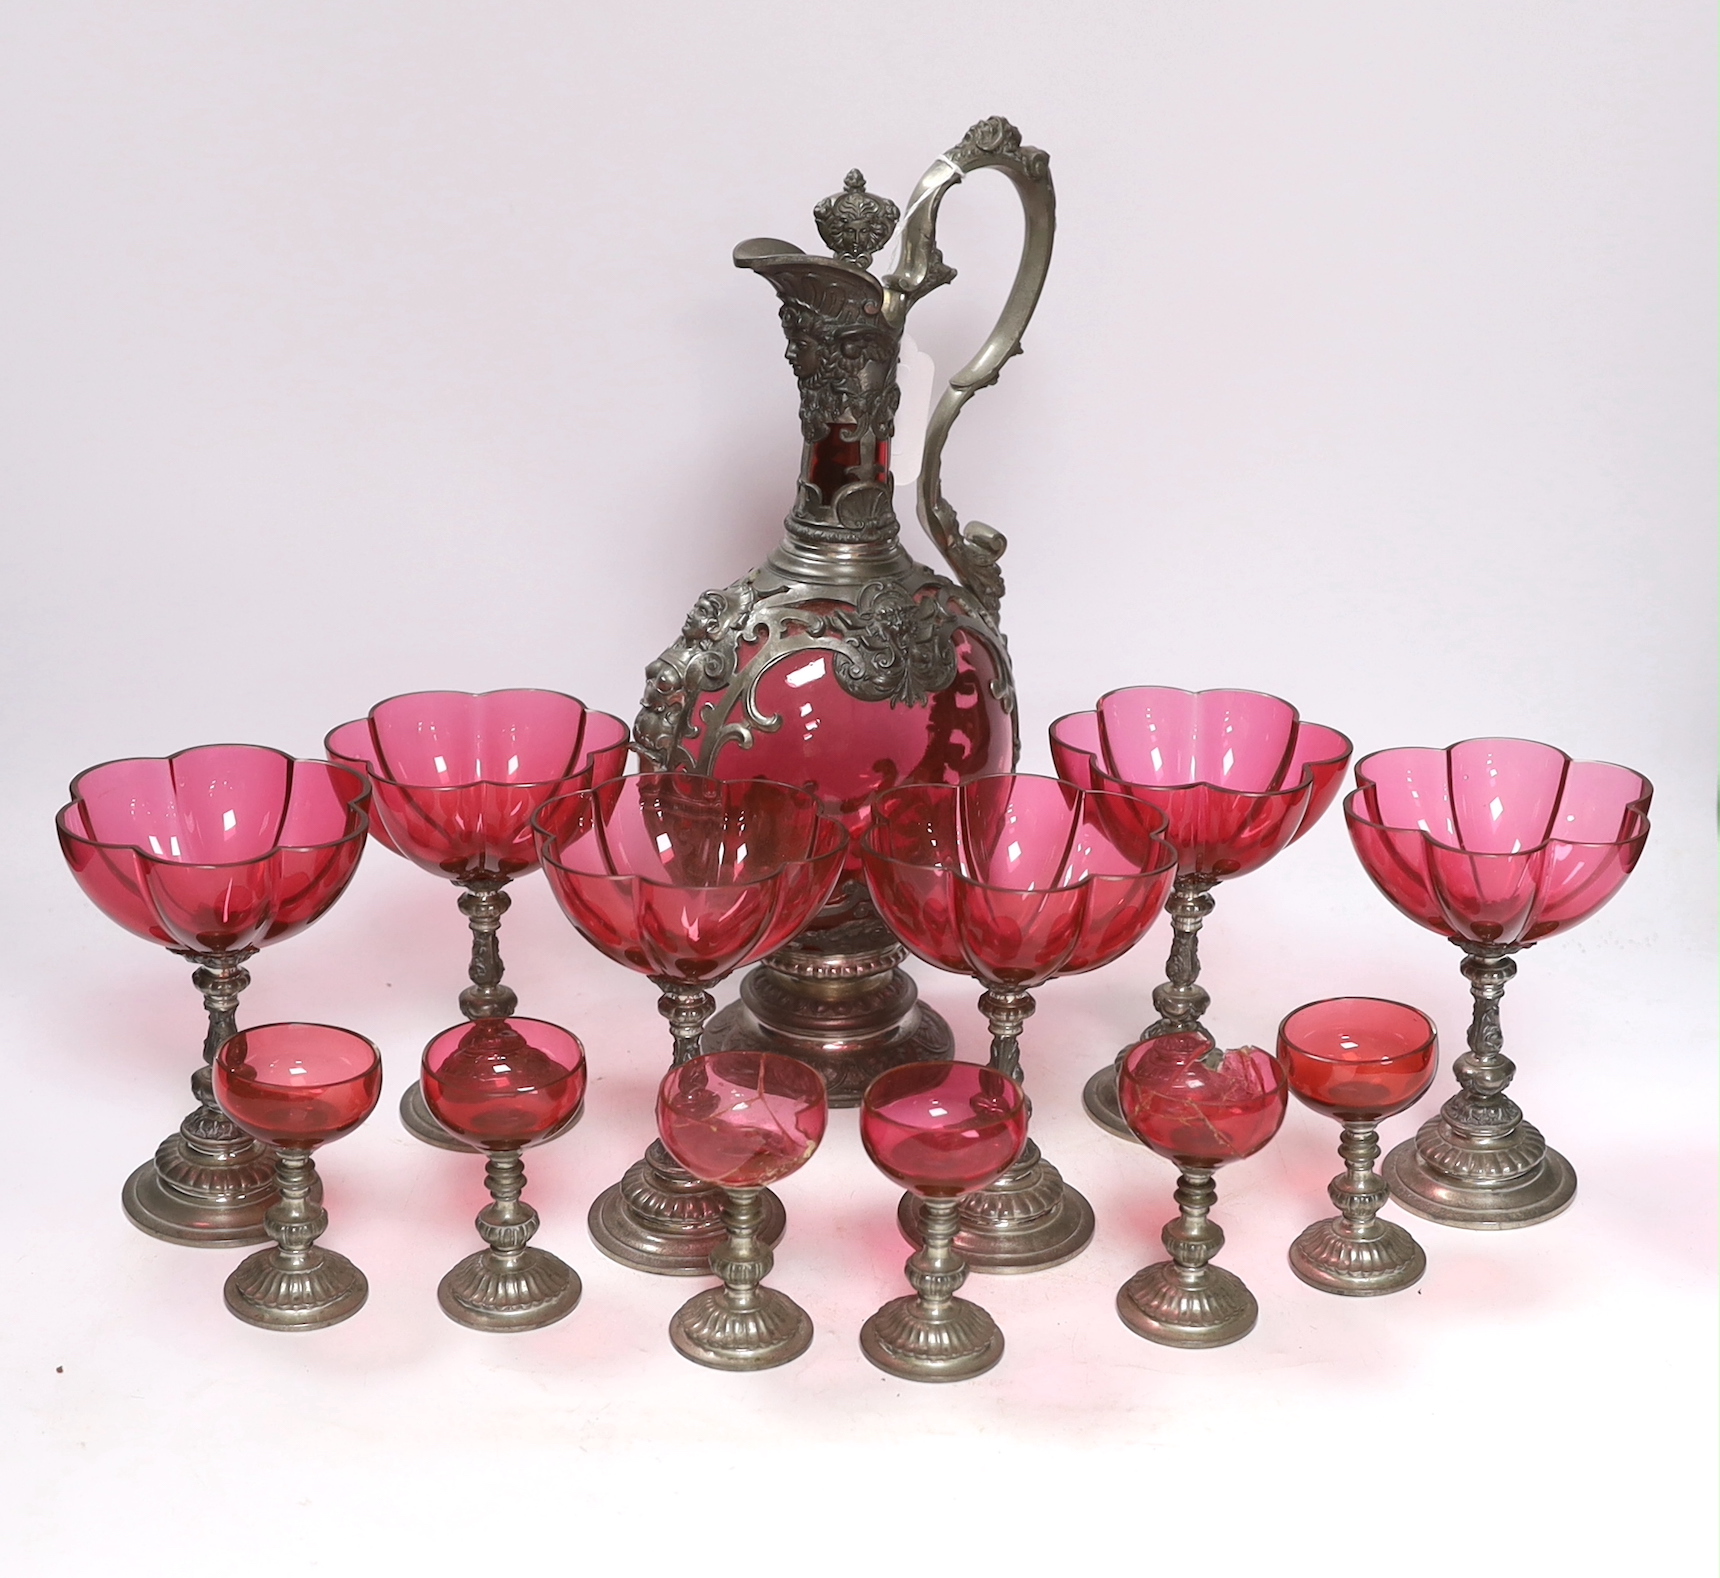 A Bohemian style pewter mounted cranberry glass ewer and twelve glasses, possibly Romanian, 33cm high